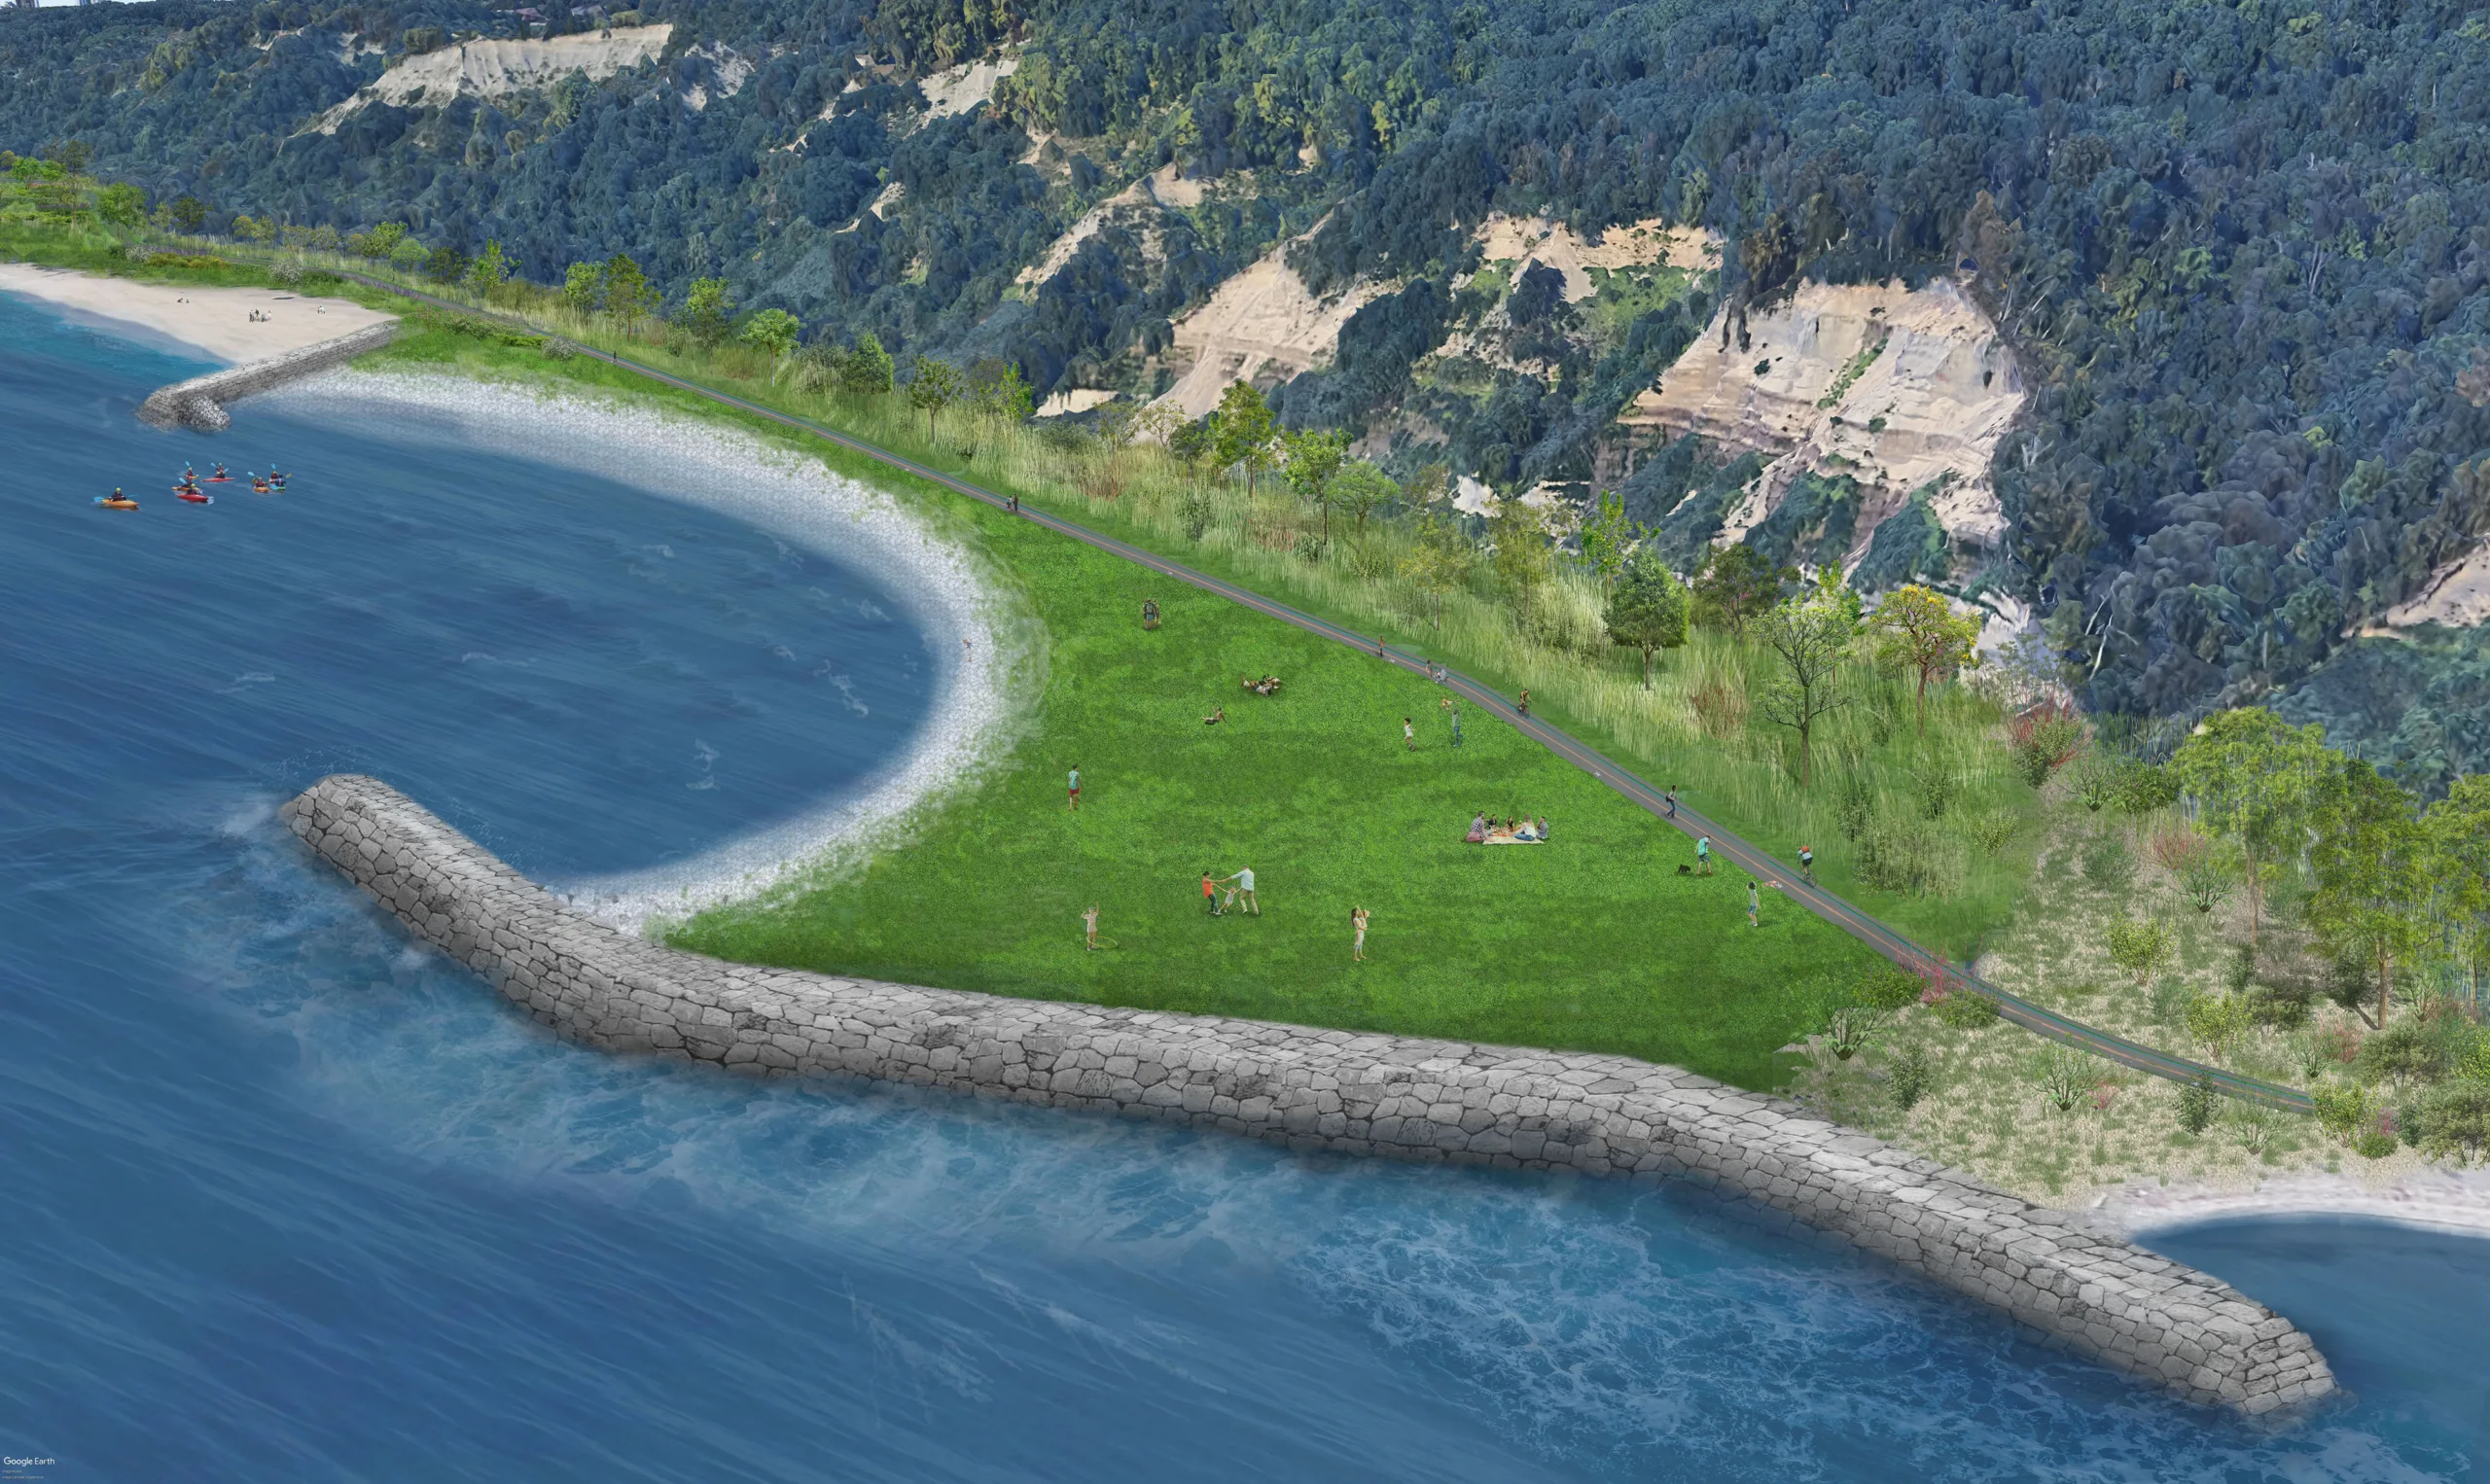 Landform headland covered in greenery, natural wetland area, shoreline, pedestrian and cyclist trail